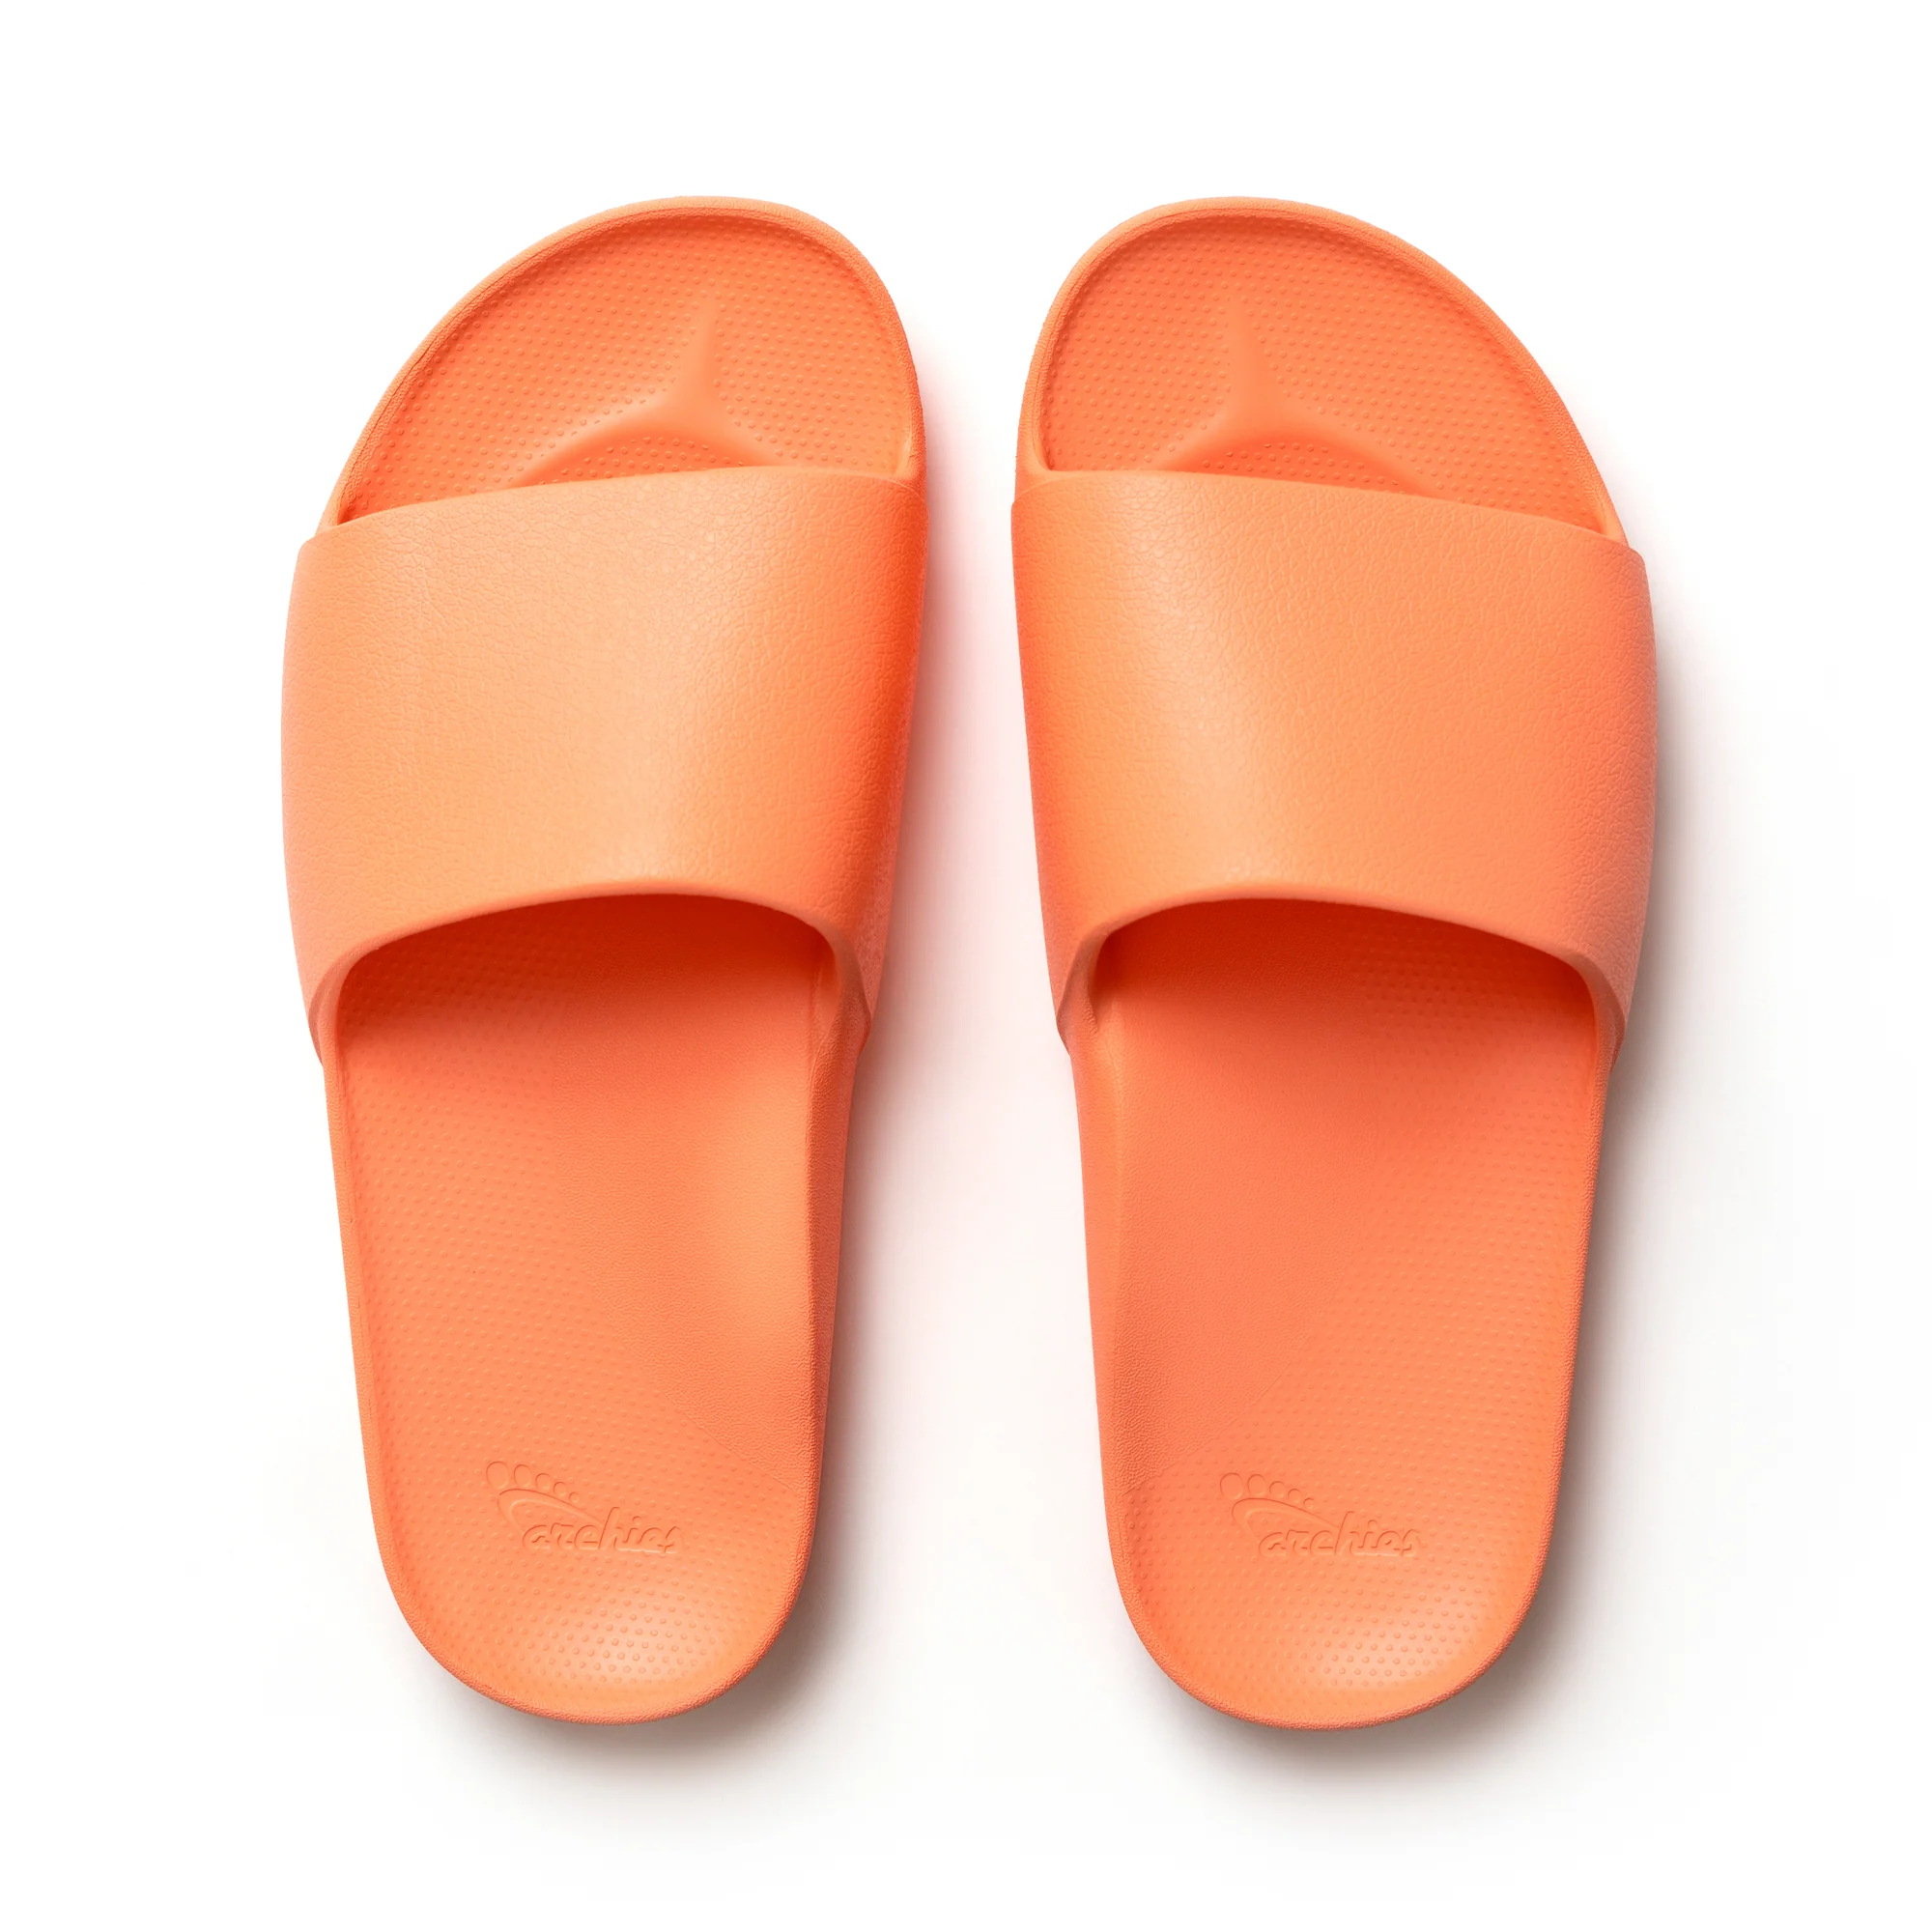 Archies Slides in Peach - Chiro1Source